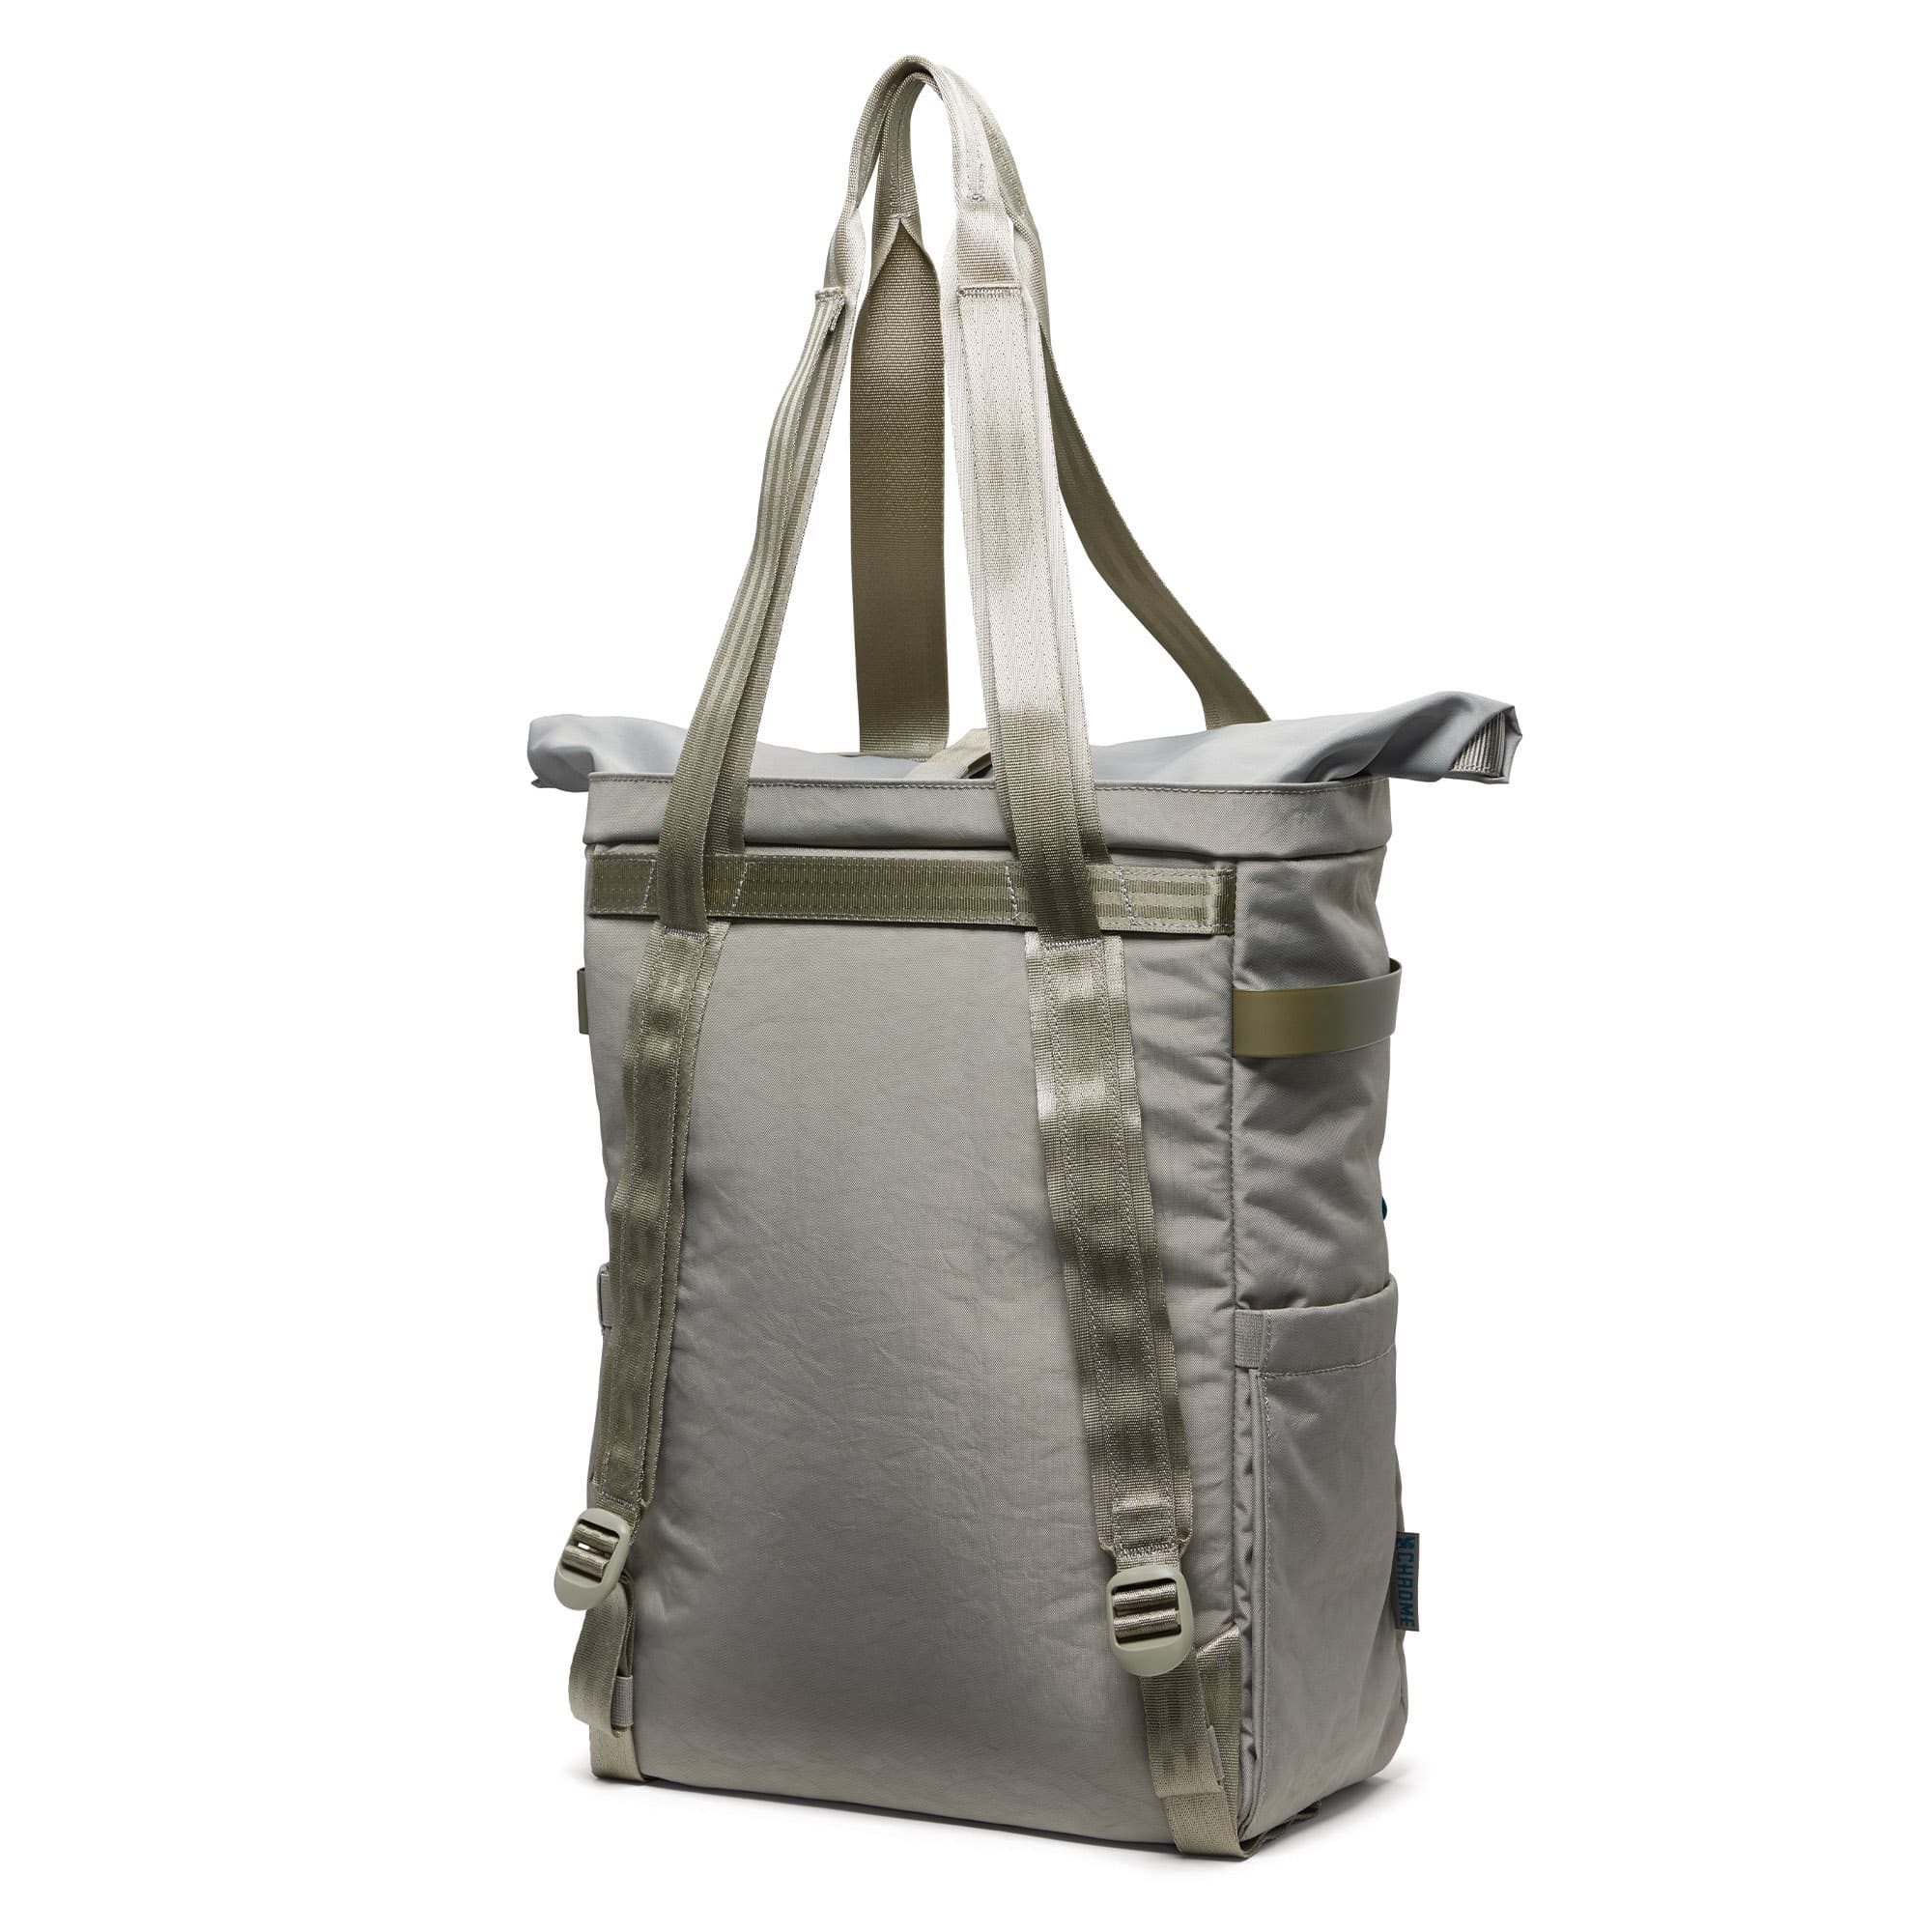 Valencia tote in sage back view with straps up #color_sage